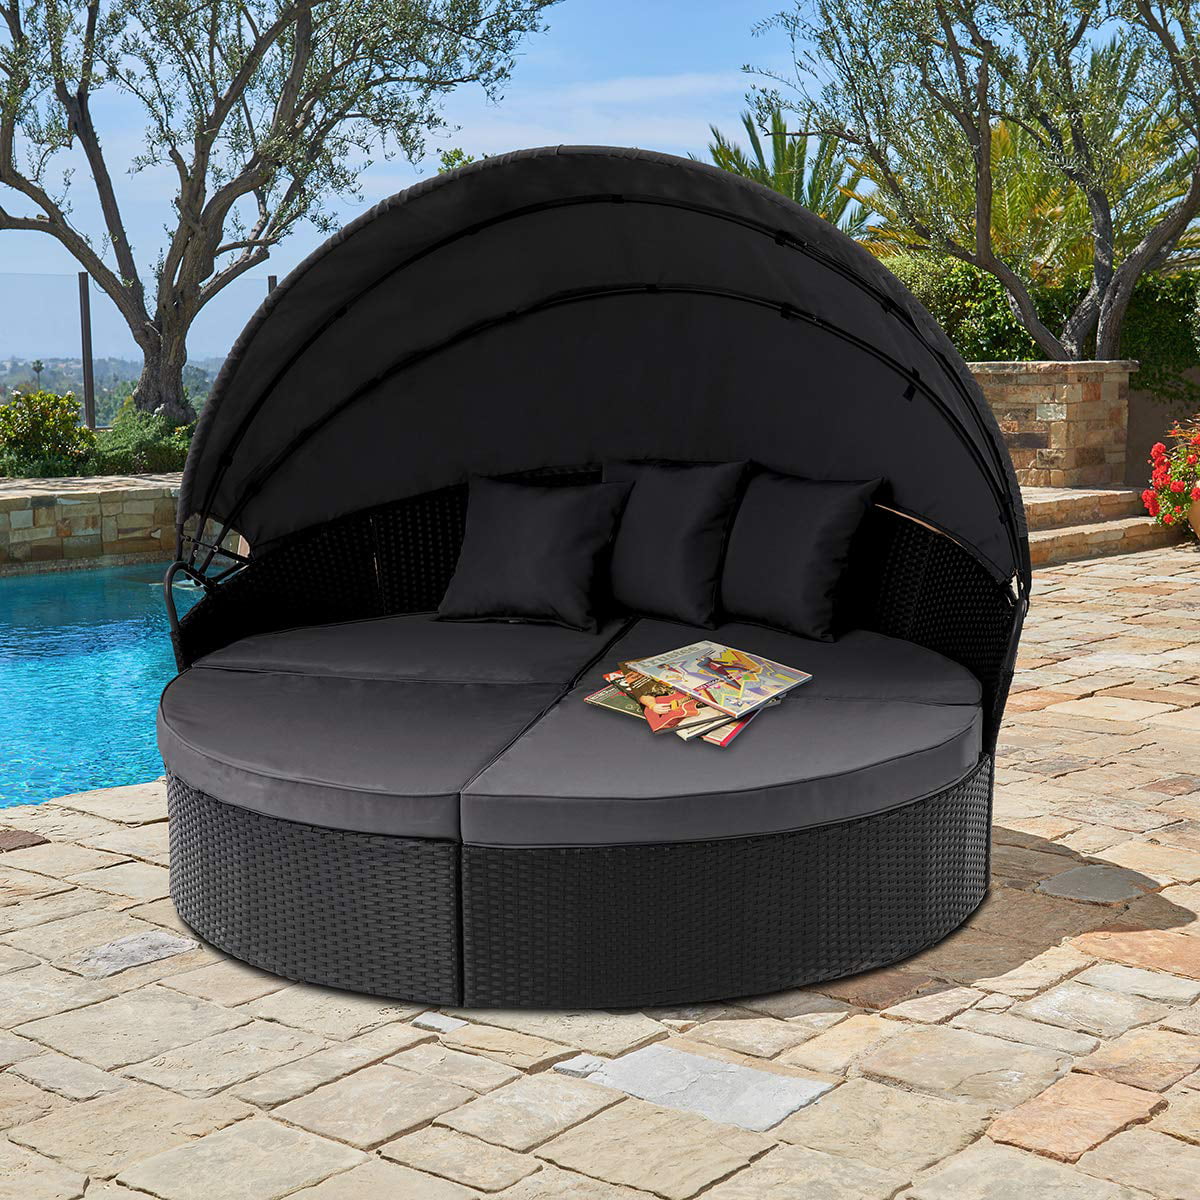 Retractable Canopy Daybed, Outdoor Furniture Daybed Cushions